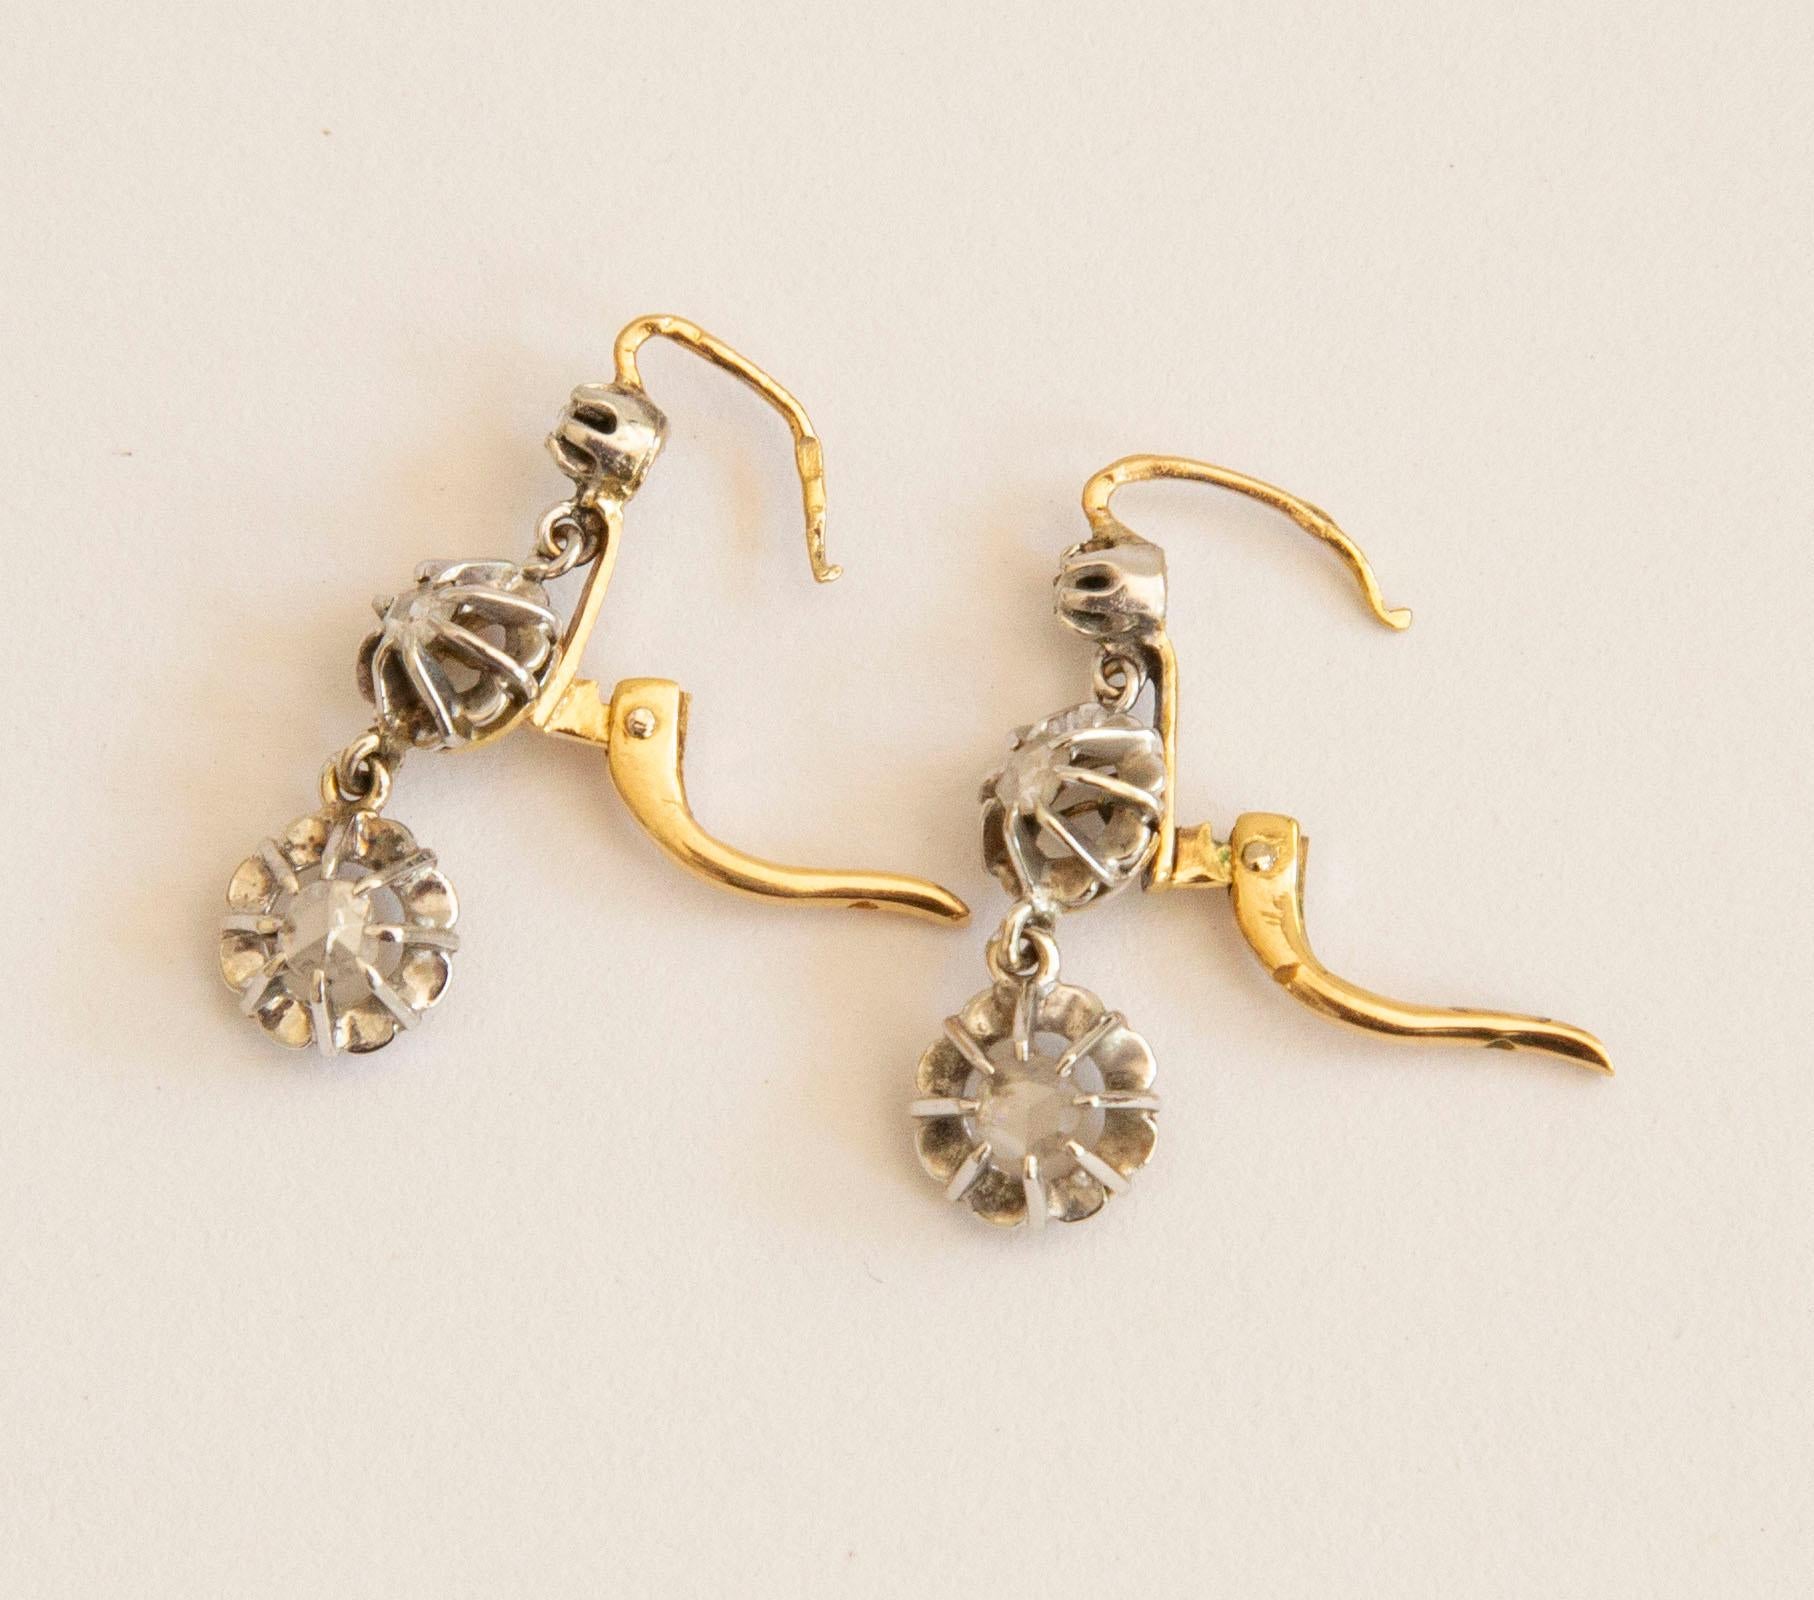 An antique pair of Victorian 14 karat yellow gold drop earrings, each set with 3 rose cut diamonds in a silver mirror chaton. The earrings feature a hinged hook closure. The earrings were made during the late Victorian period in the late 19th